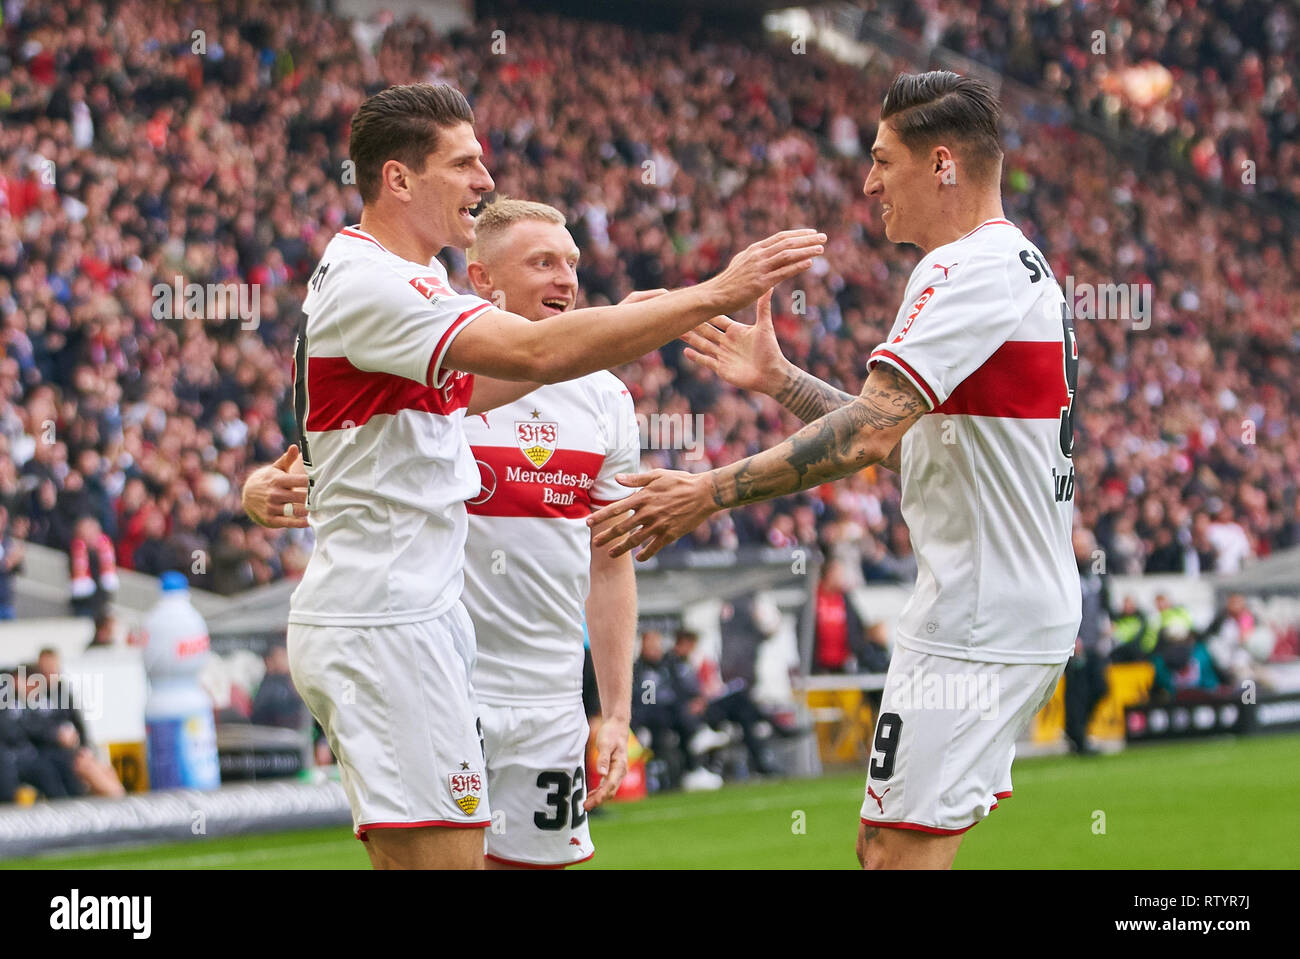 Stuttgart, Germany . 03rd Mar, 2019. Mario GOMEZ, VFB 27 celebrates his goal for  , happy, laugh, celebration, 1-0, Steven ZUBER, VFB 9 Andreas BECK, VFB 32  VFB STUTTGART - HANNOVER 96  - DFL REGULATIONS PROHIBIT ANY USE OF PHOTOGRAPHS as IMAGE SEQUENCES and/or QUASI-VIDEO -  DFL 1.German Soccer League , Stuttgart, March 3, 2019,  Season 2018/2019, matchday 24, H96 Credit: Peter Schatz/Alamy Live News Stock Photo